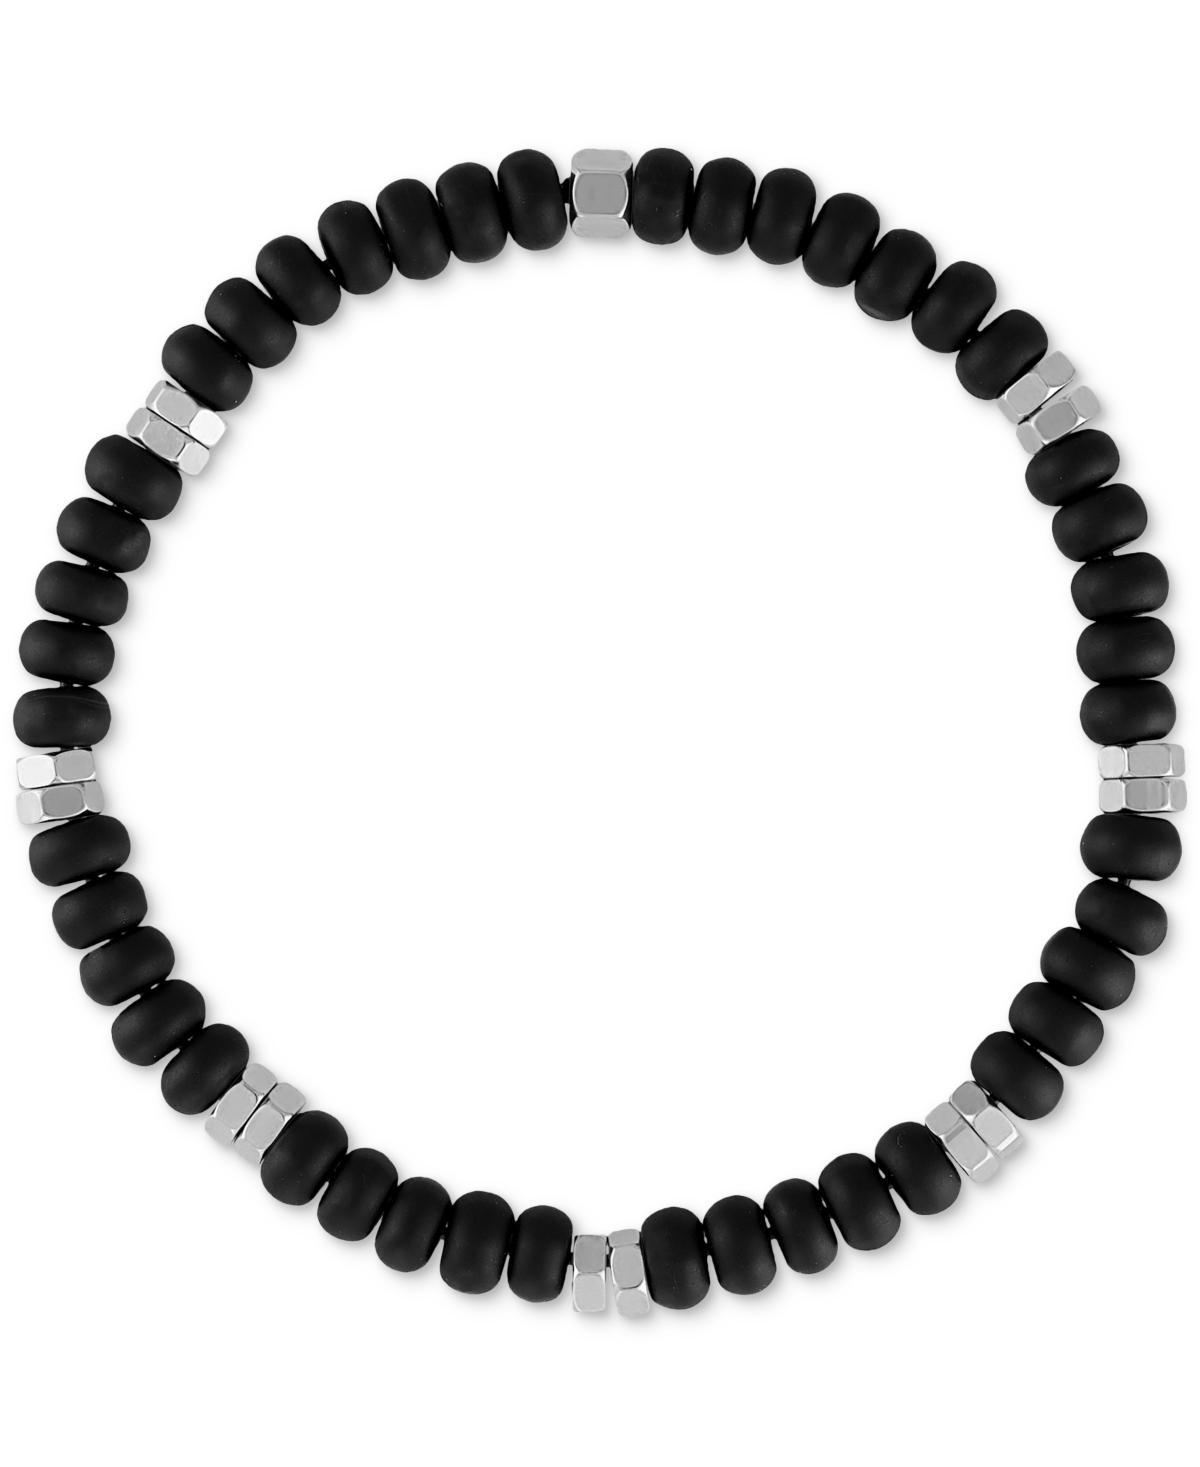 Esquire Men's Jewelry Onyx Bead Stretch Bracelet in Sterling Silver (Also in Sodalite), Created for Macy's